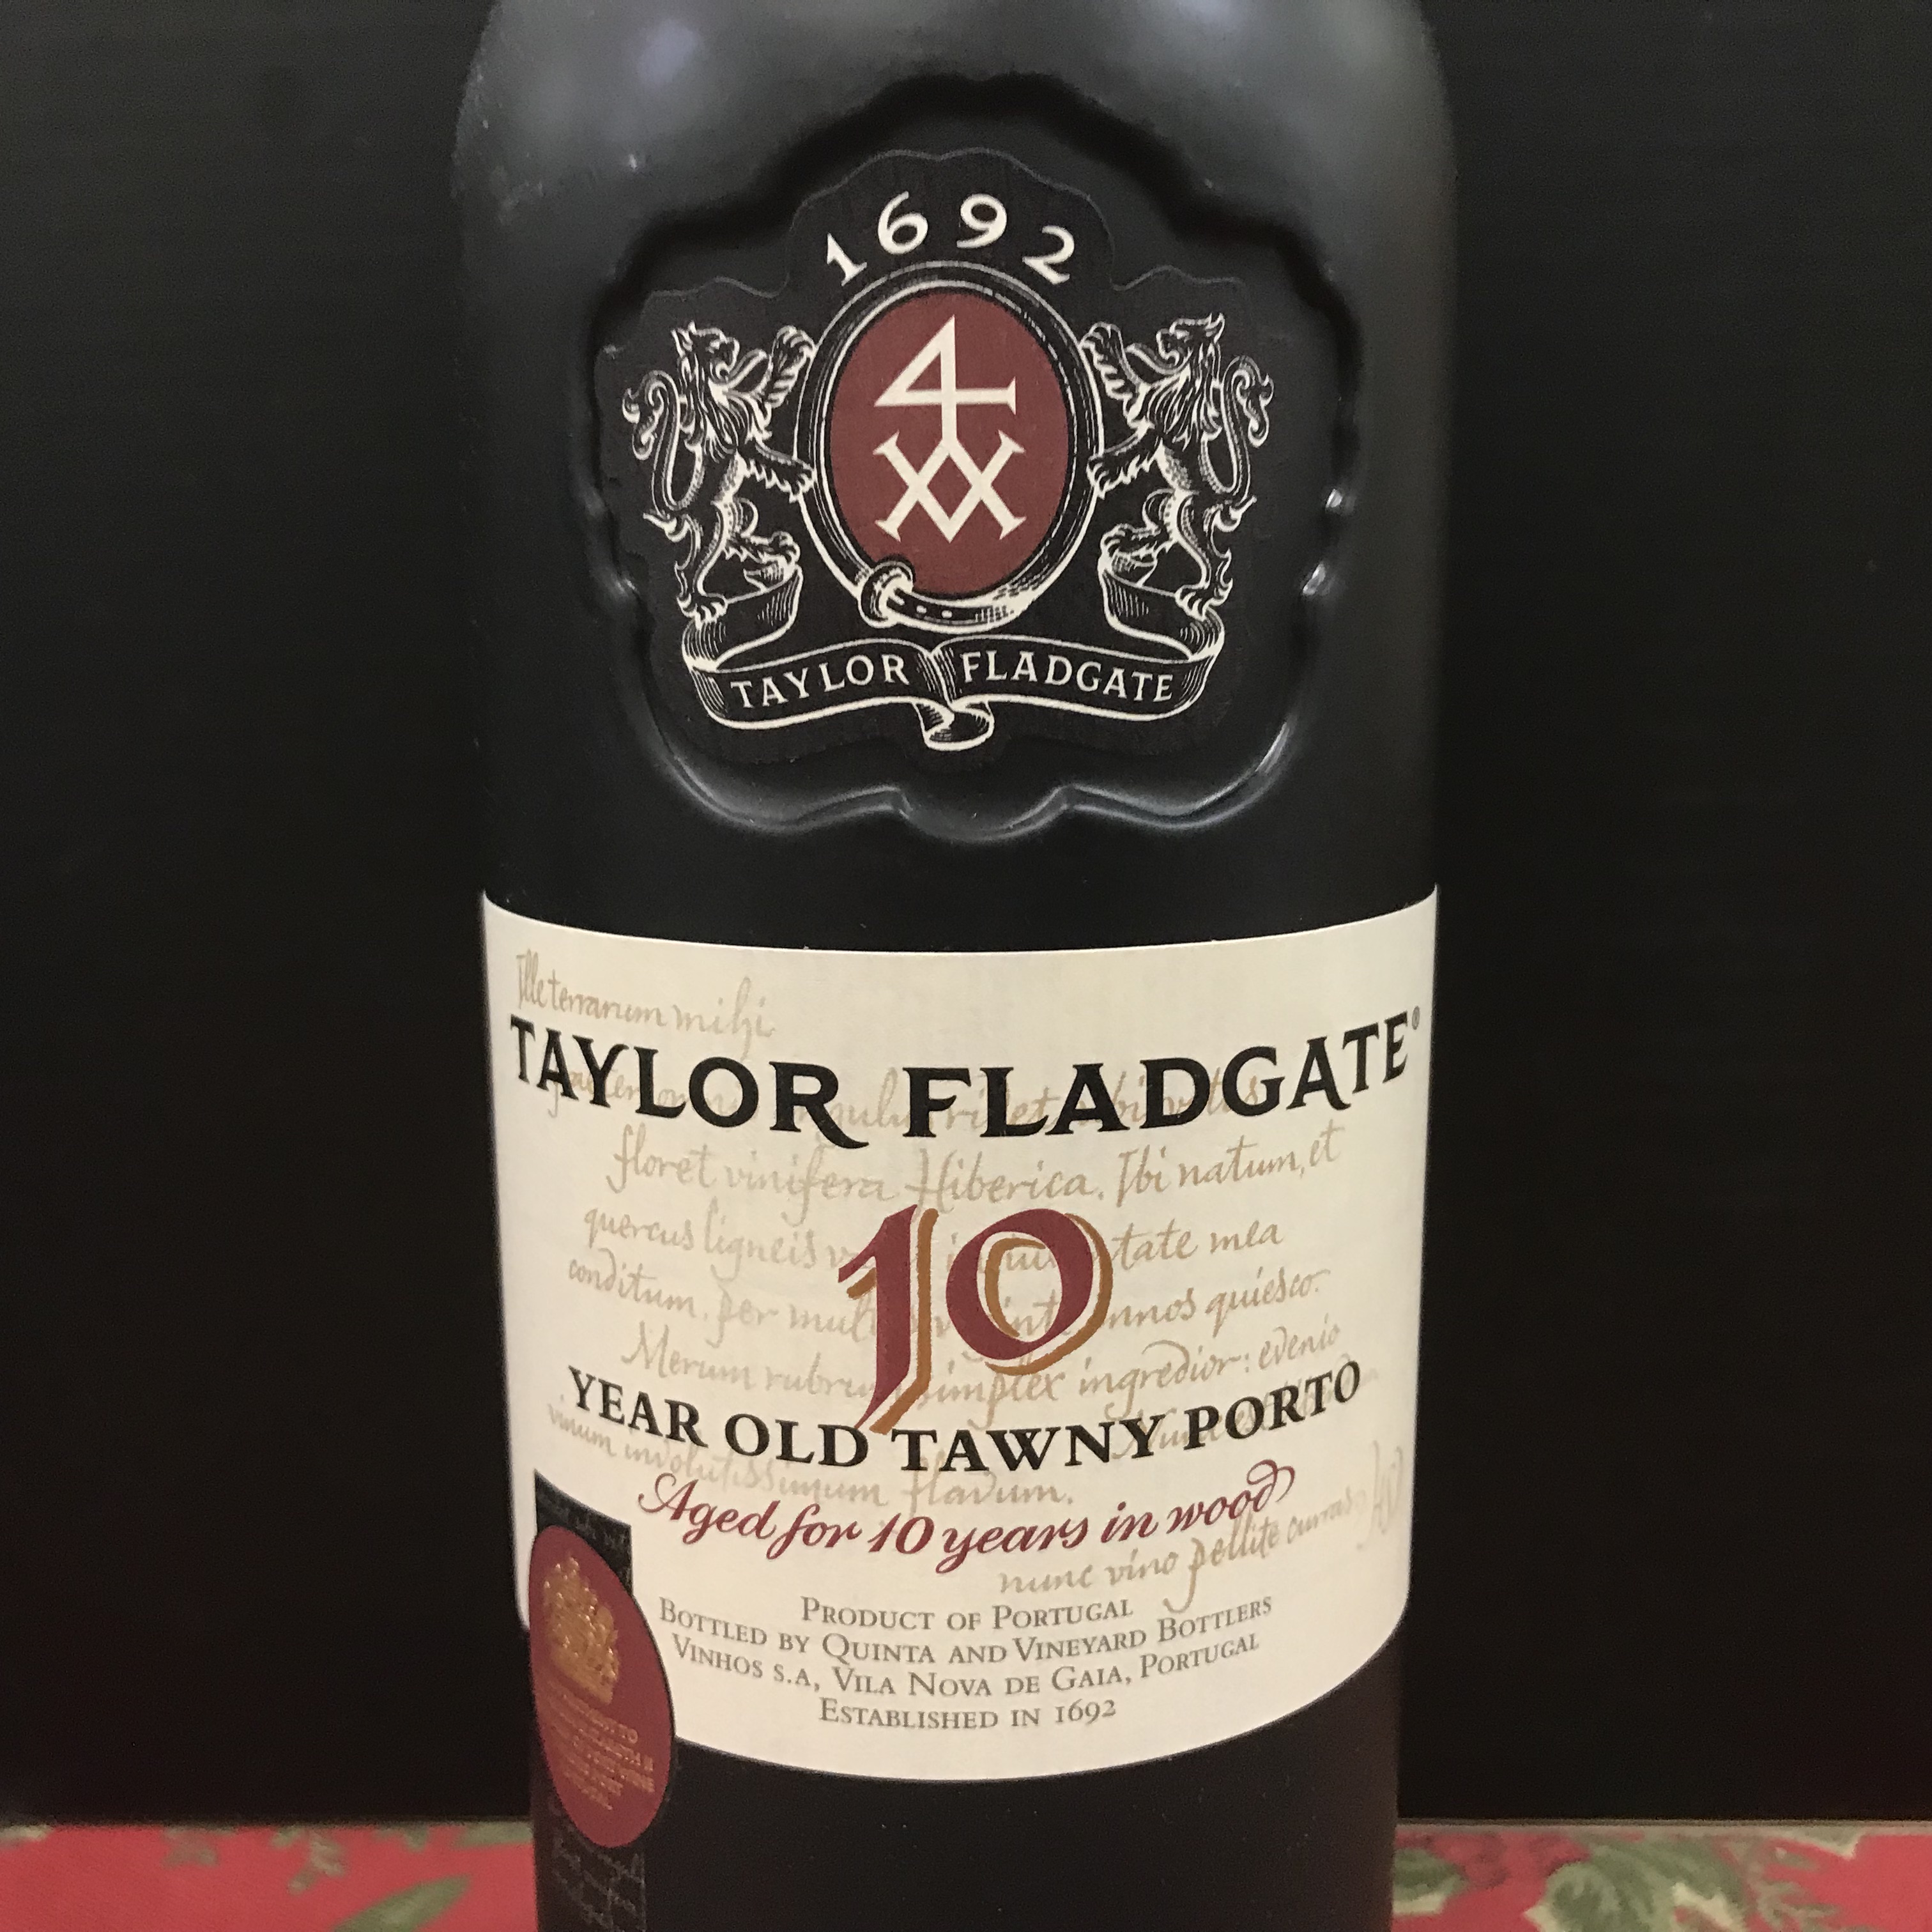 Taylor Fladgate 10 year old Tawny port